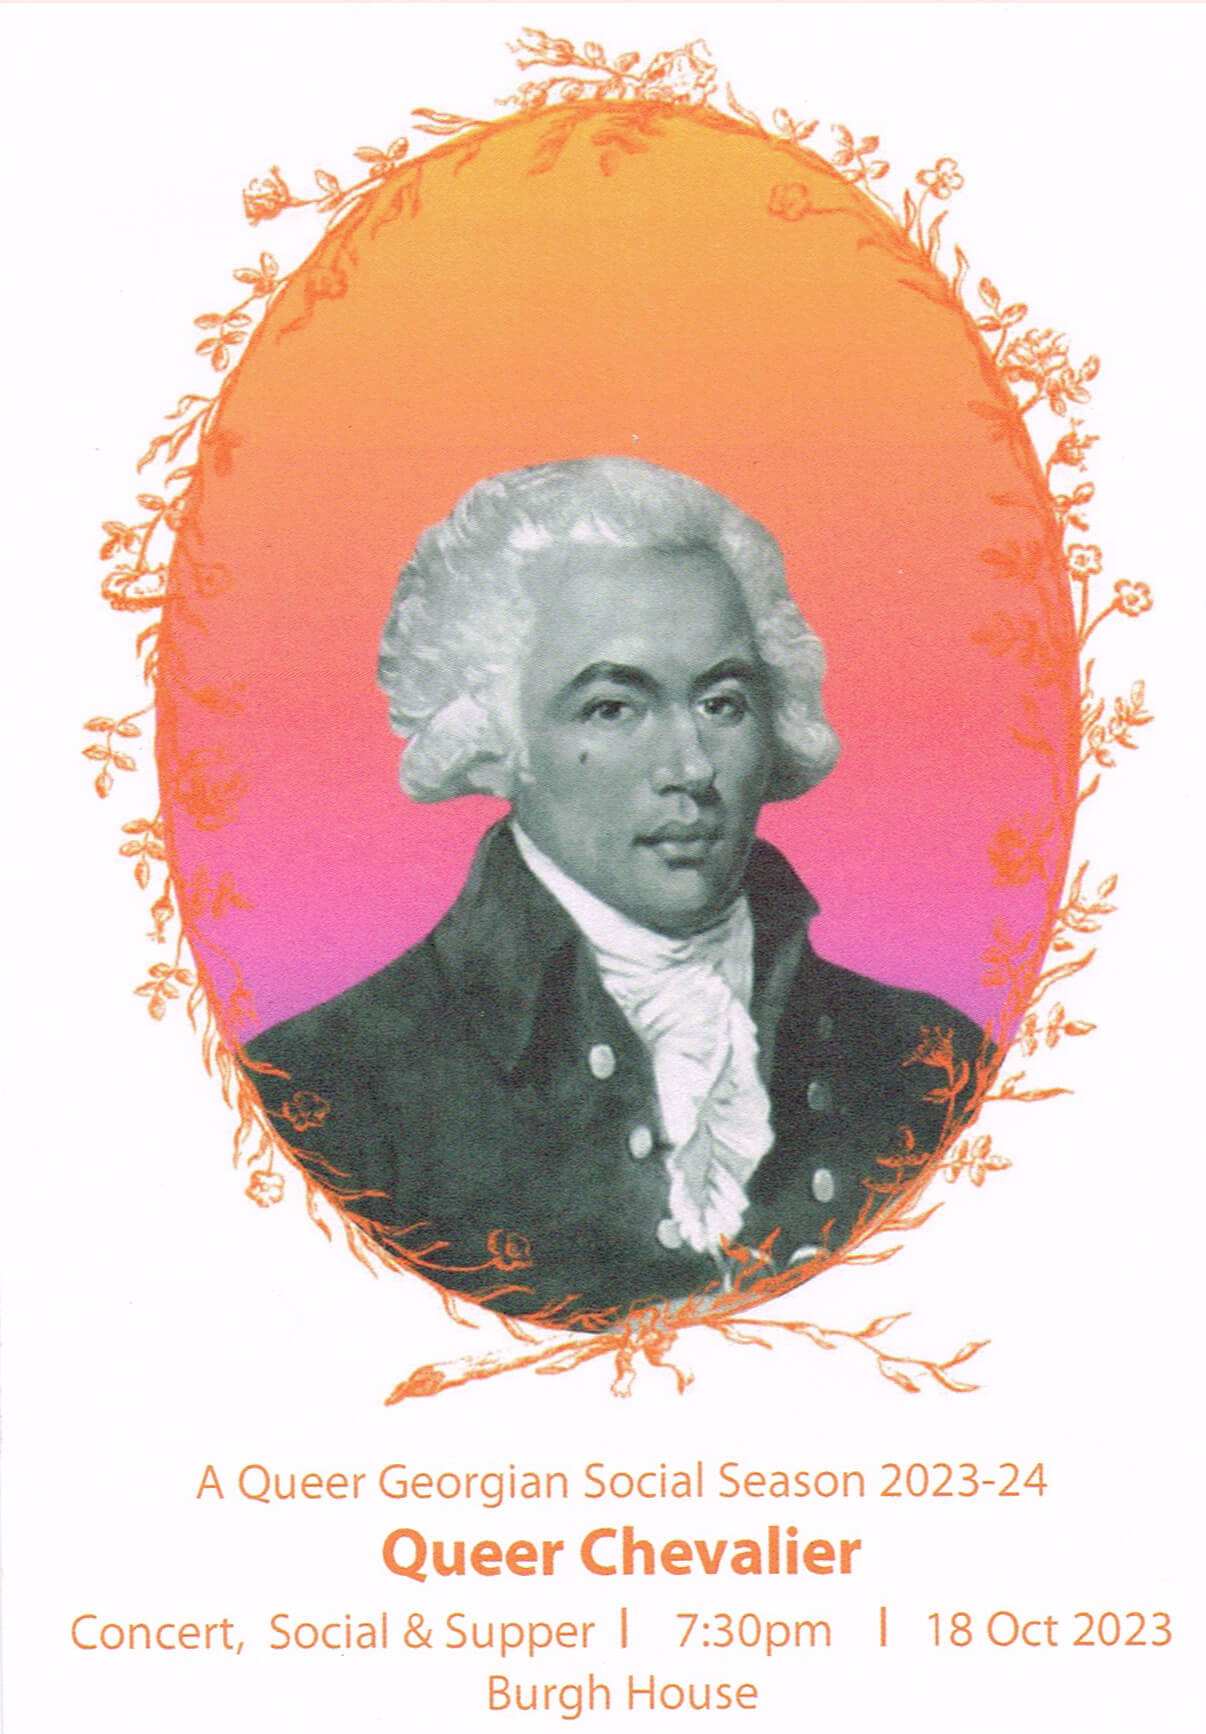 Poster for A Queer Georgian Season's 2023 event at Burgh House featuring a stylised image of Joseph Bologne, Chevalier de Saint-Georges.